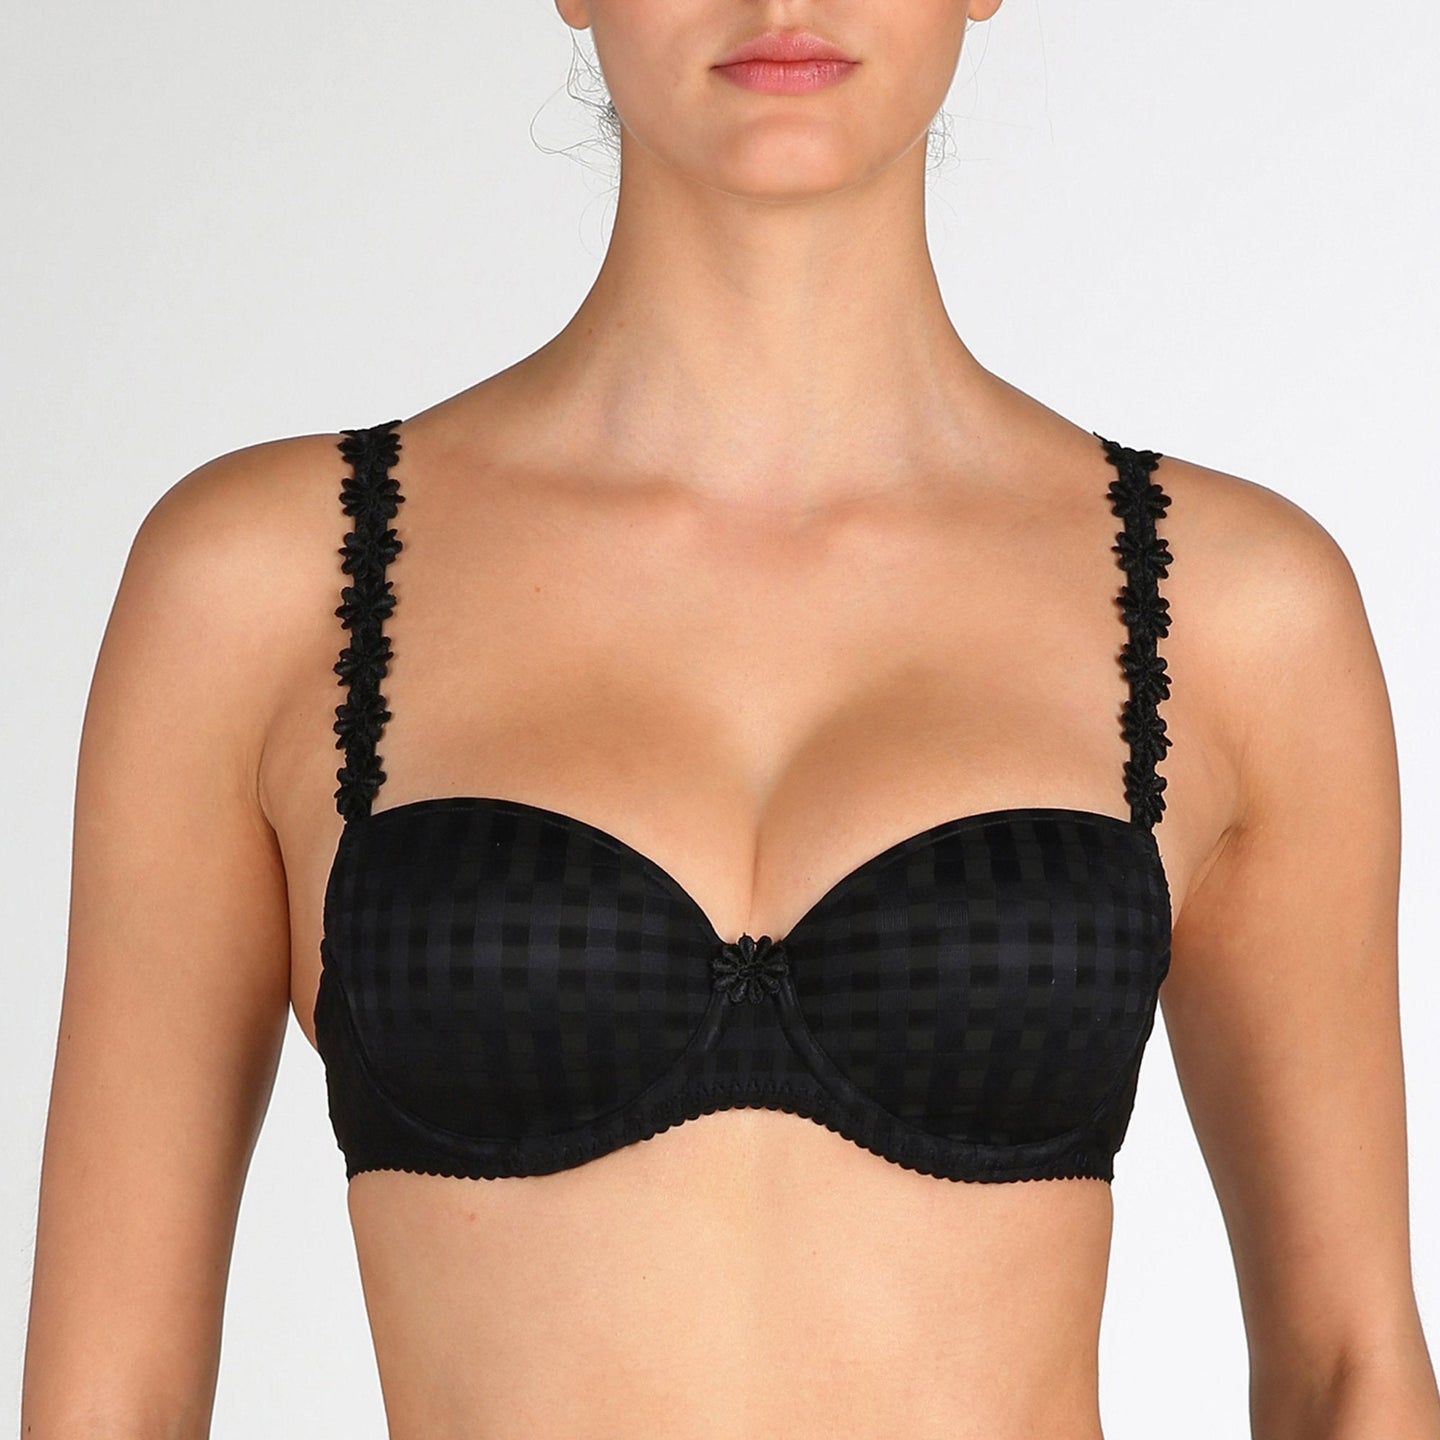 Smooth formed cup underwire balconnet bra with daisy strap detail. This underwire bra may be converted to a halter strap. This bra has the added advantage that it may be used as a halter or crossed over at the back.  Fabric Content: Polyester: 53%, Polyamide: 39%, Elastane: 8%